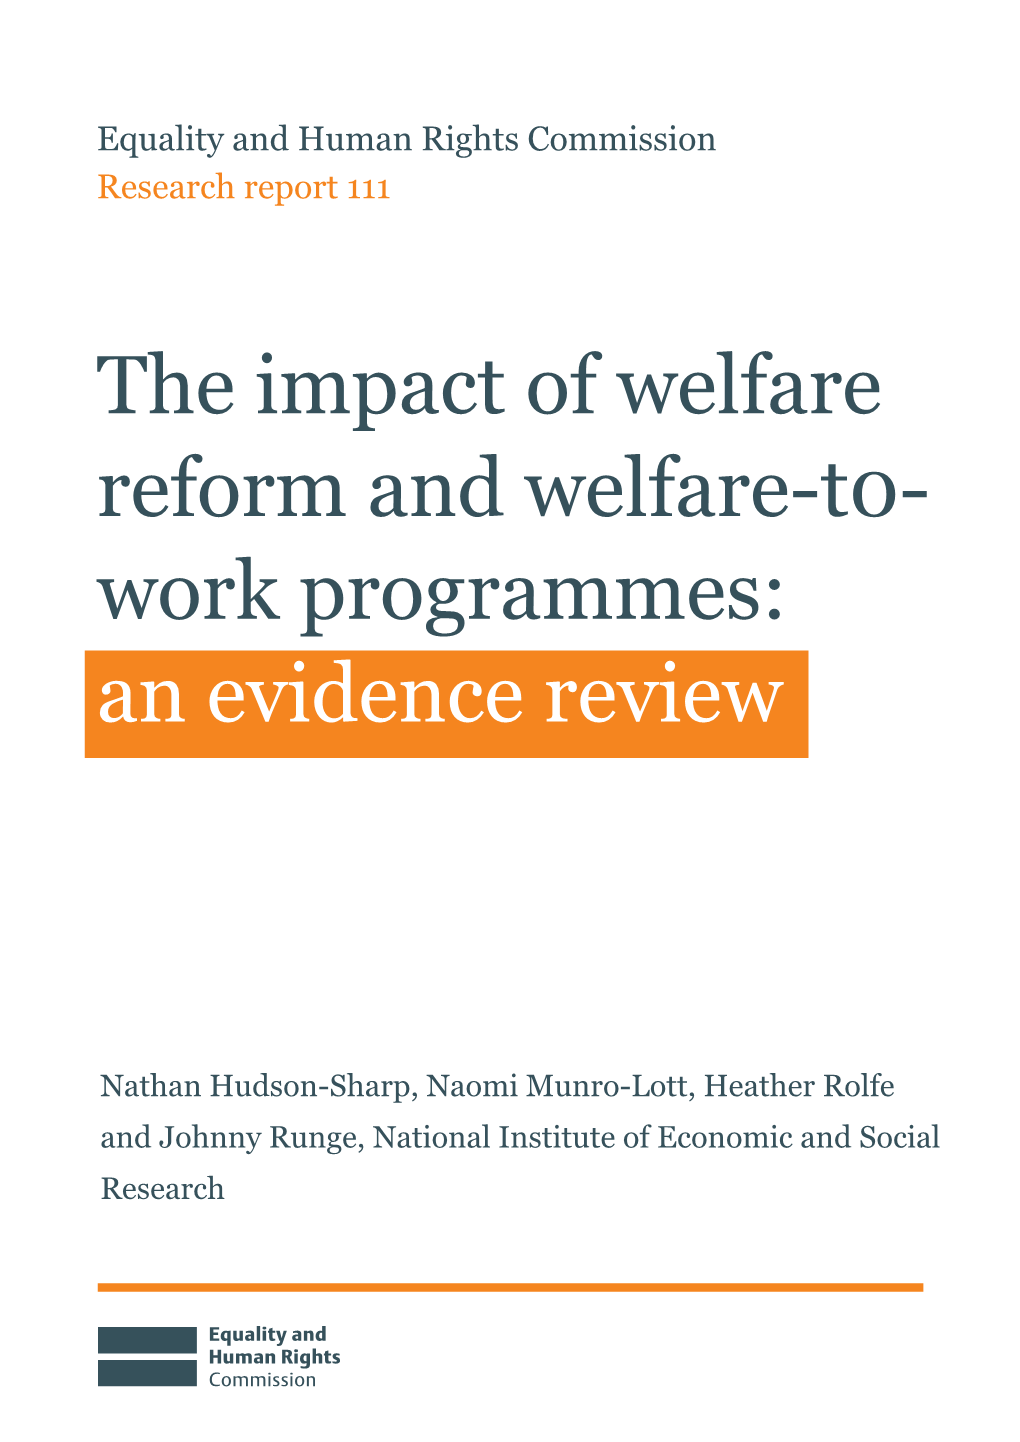 The Impact of Welfare Reform and Welfare-T0- Work Programmes: an Evidence Review